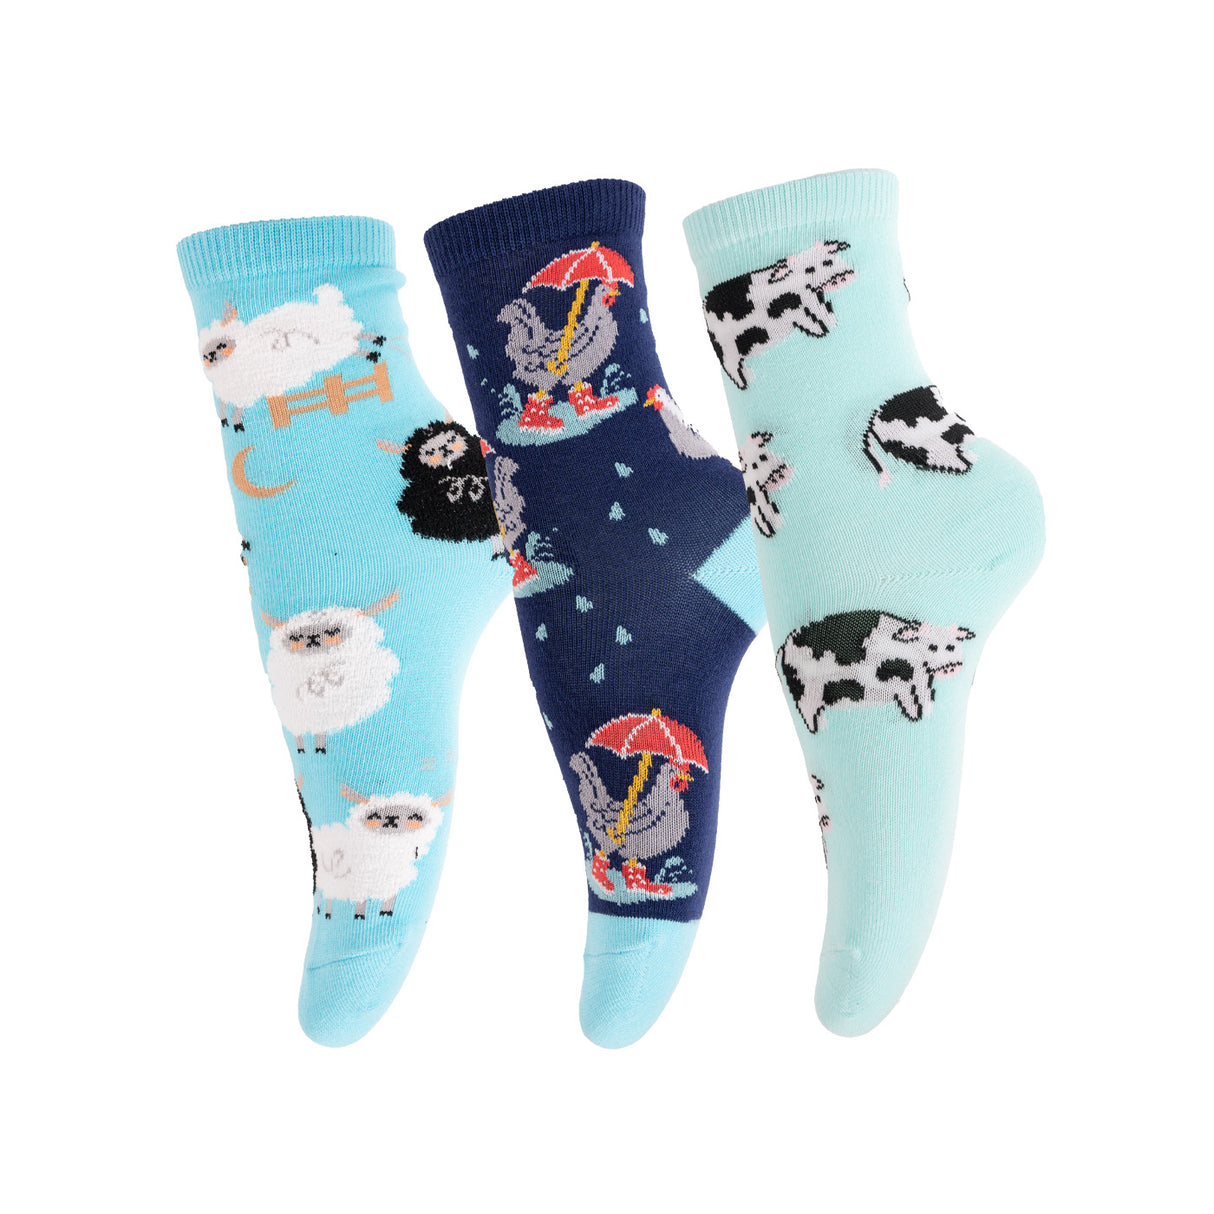 Sock It To Me You Can Count On Me Crew Socks Pack - Kids'